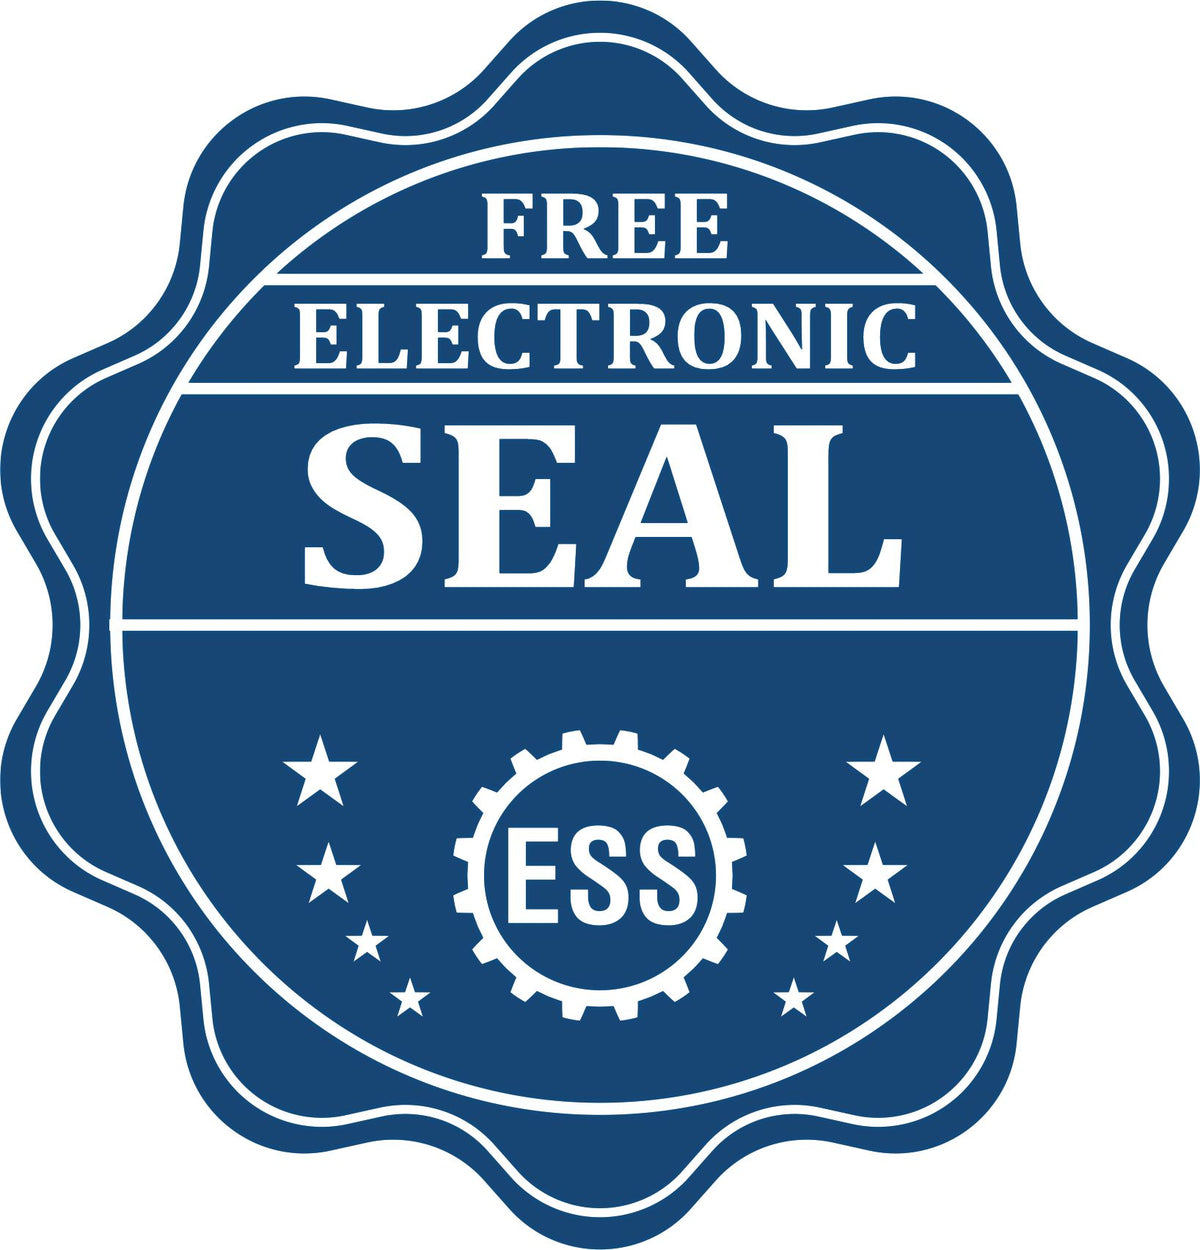 A badge showing a free electronic seal for the Slim Pre-Inked Arizona Architect Seal Stamp with stars and the ESS gear on the emblem.